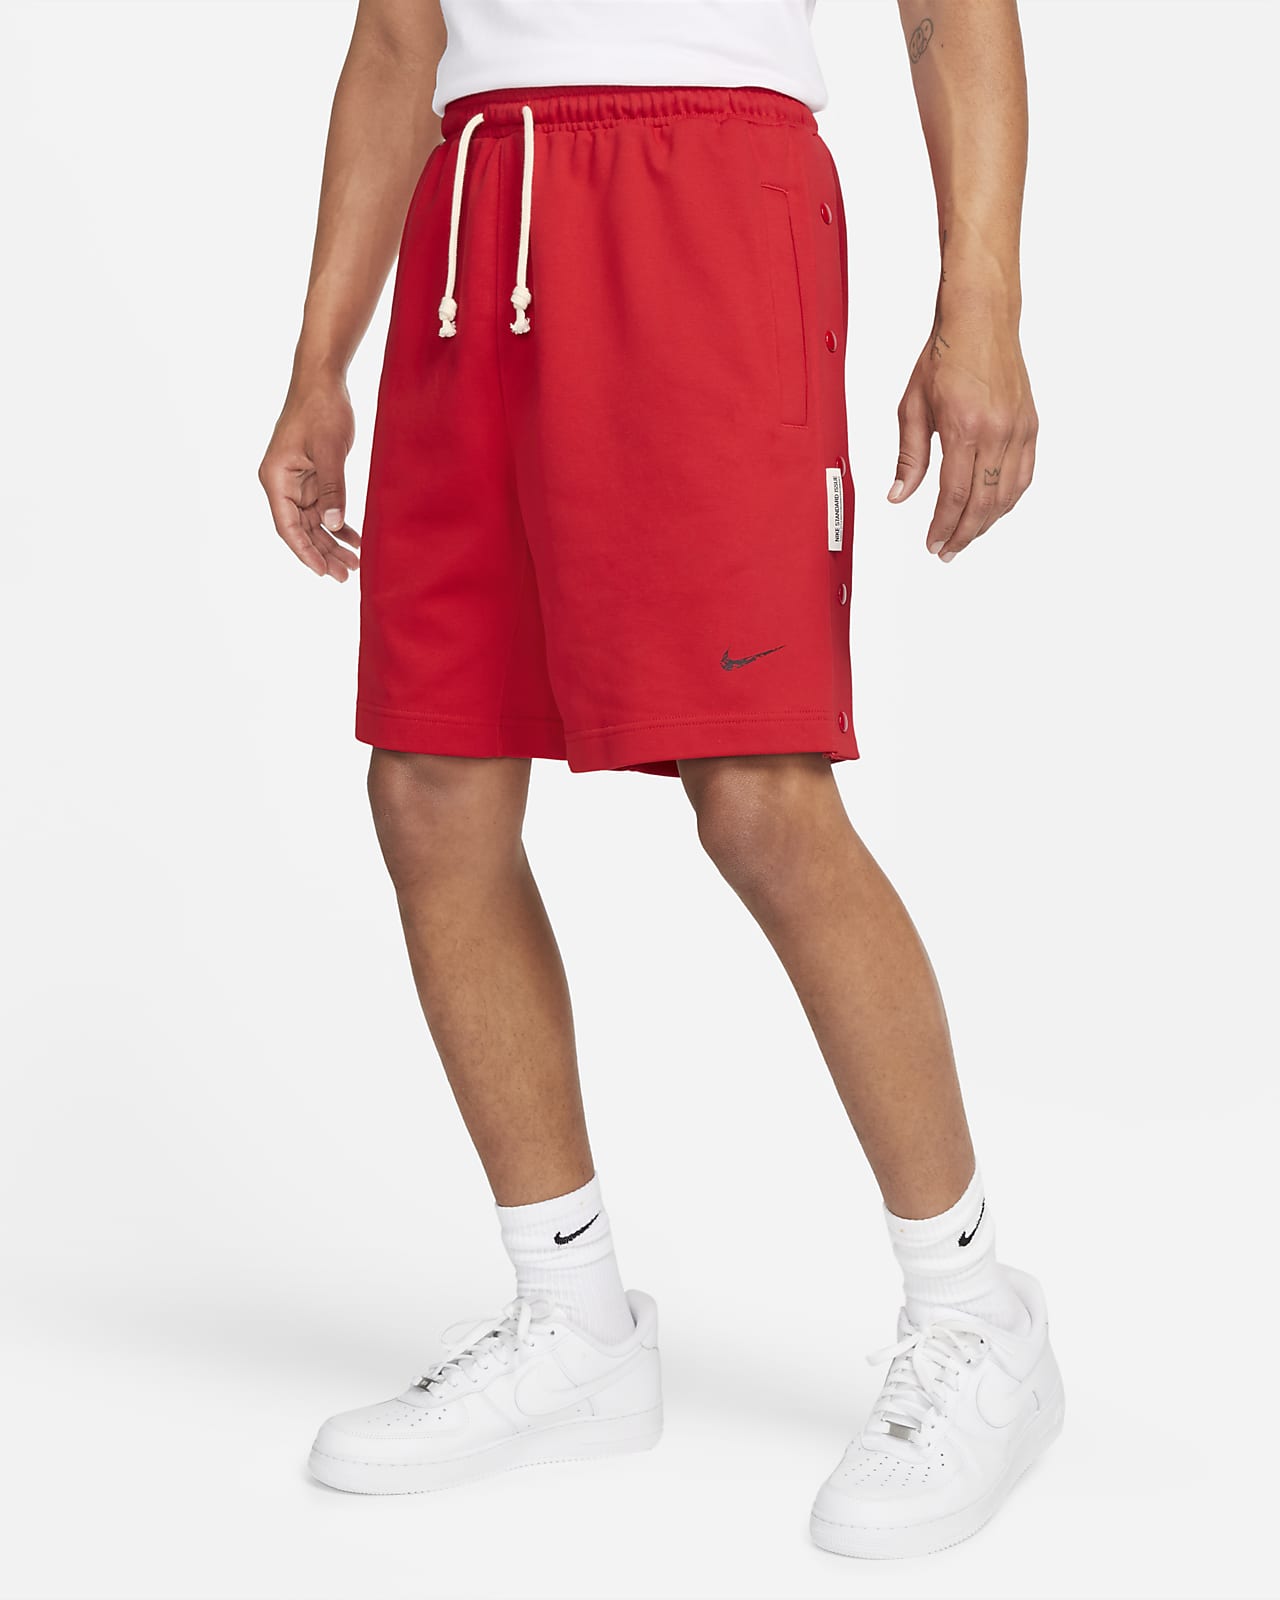 Nike Dri-FIT Standard Issue Men's 8" French Terry Basketball Shorts